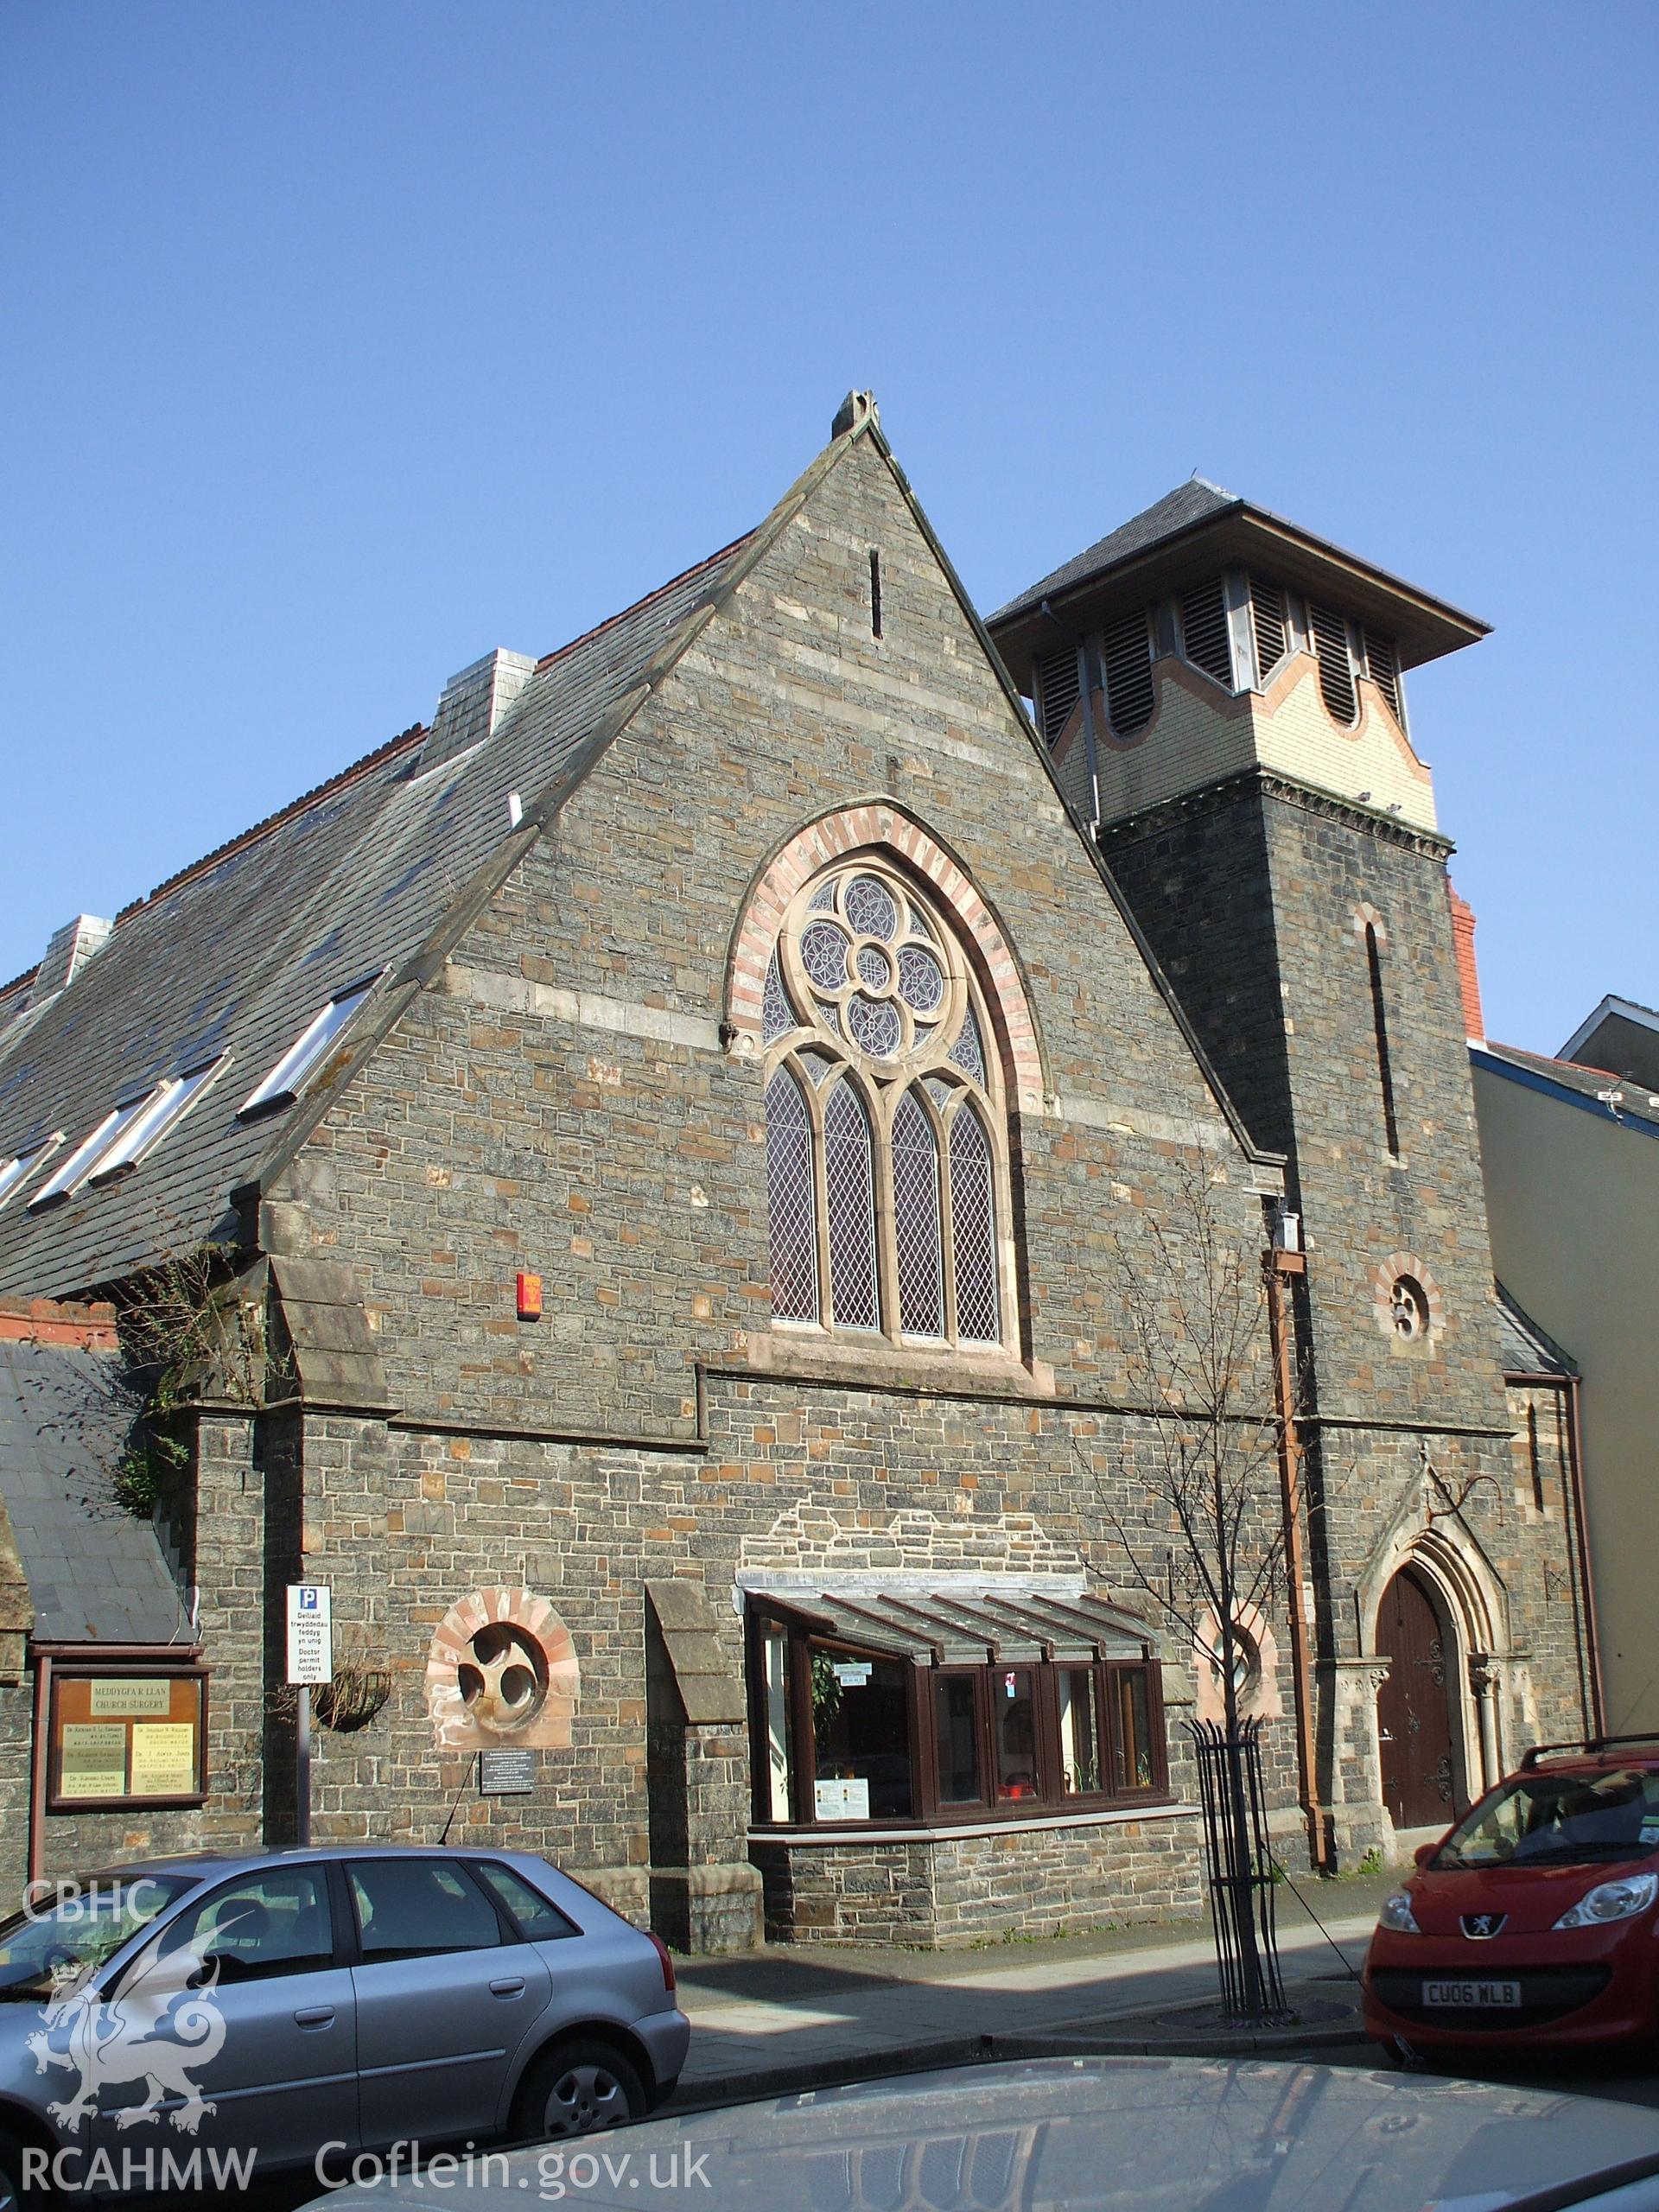 Colour digital photograph showing the front exterior of the former Portland Street English Congregational church, now Church surgery.